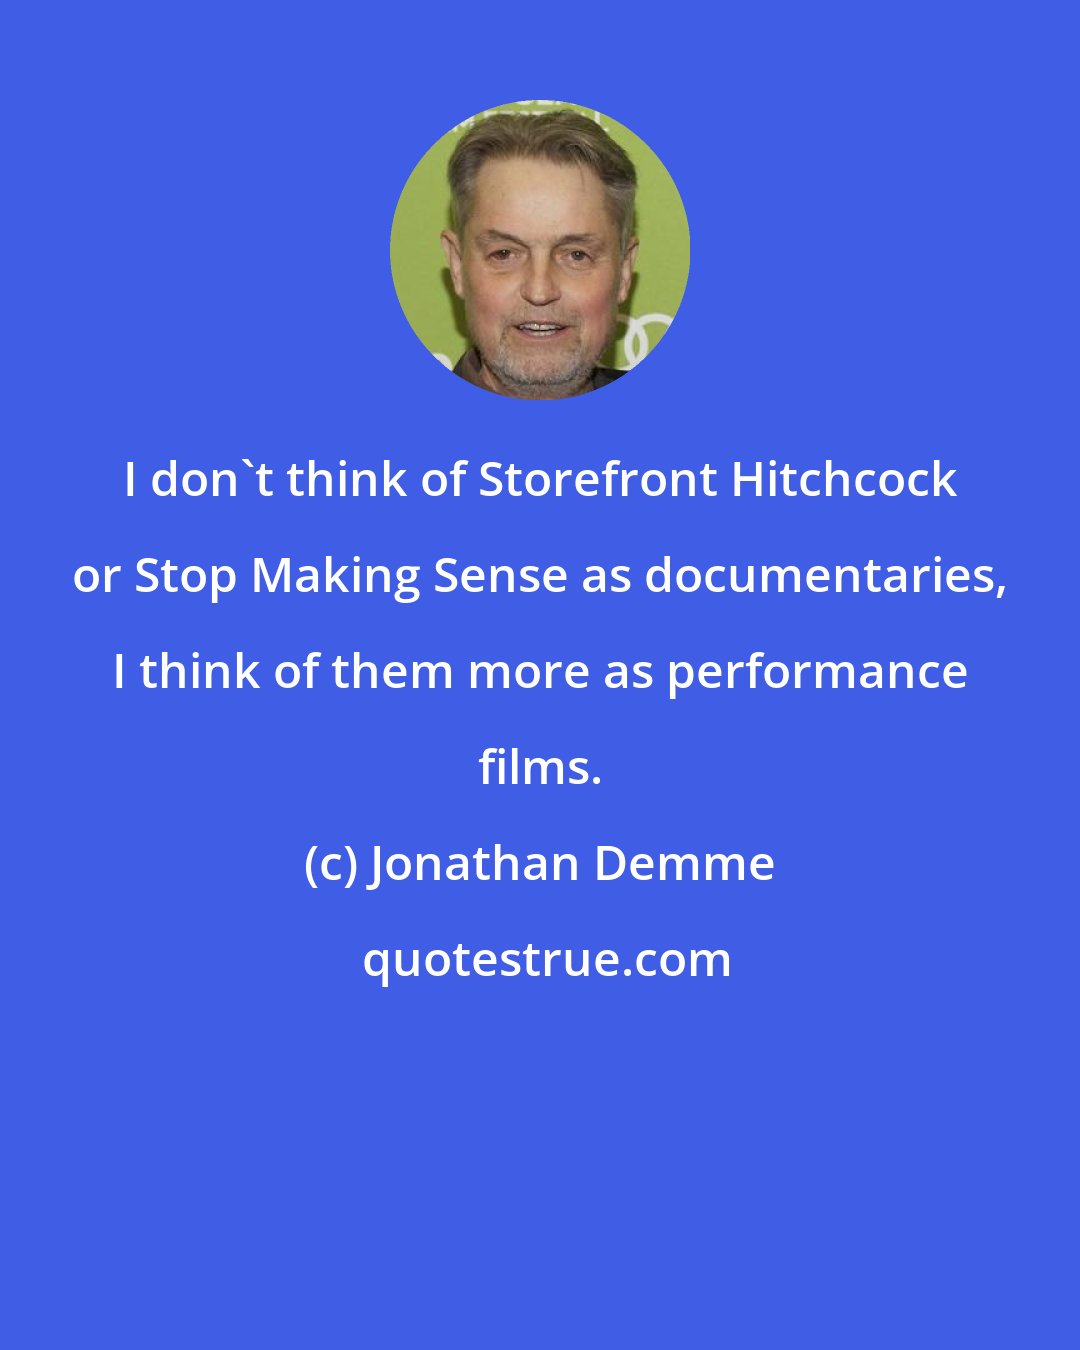 Jonathan Demme: I don't think of Storefront Hitchcock or Stop Making Sense as documentaries, I think of them more as performance films.